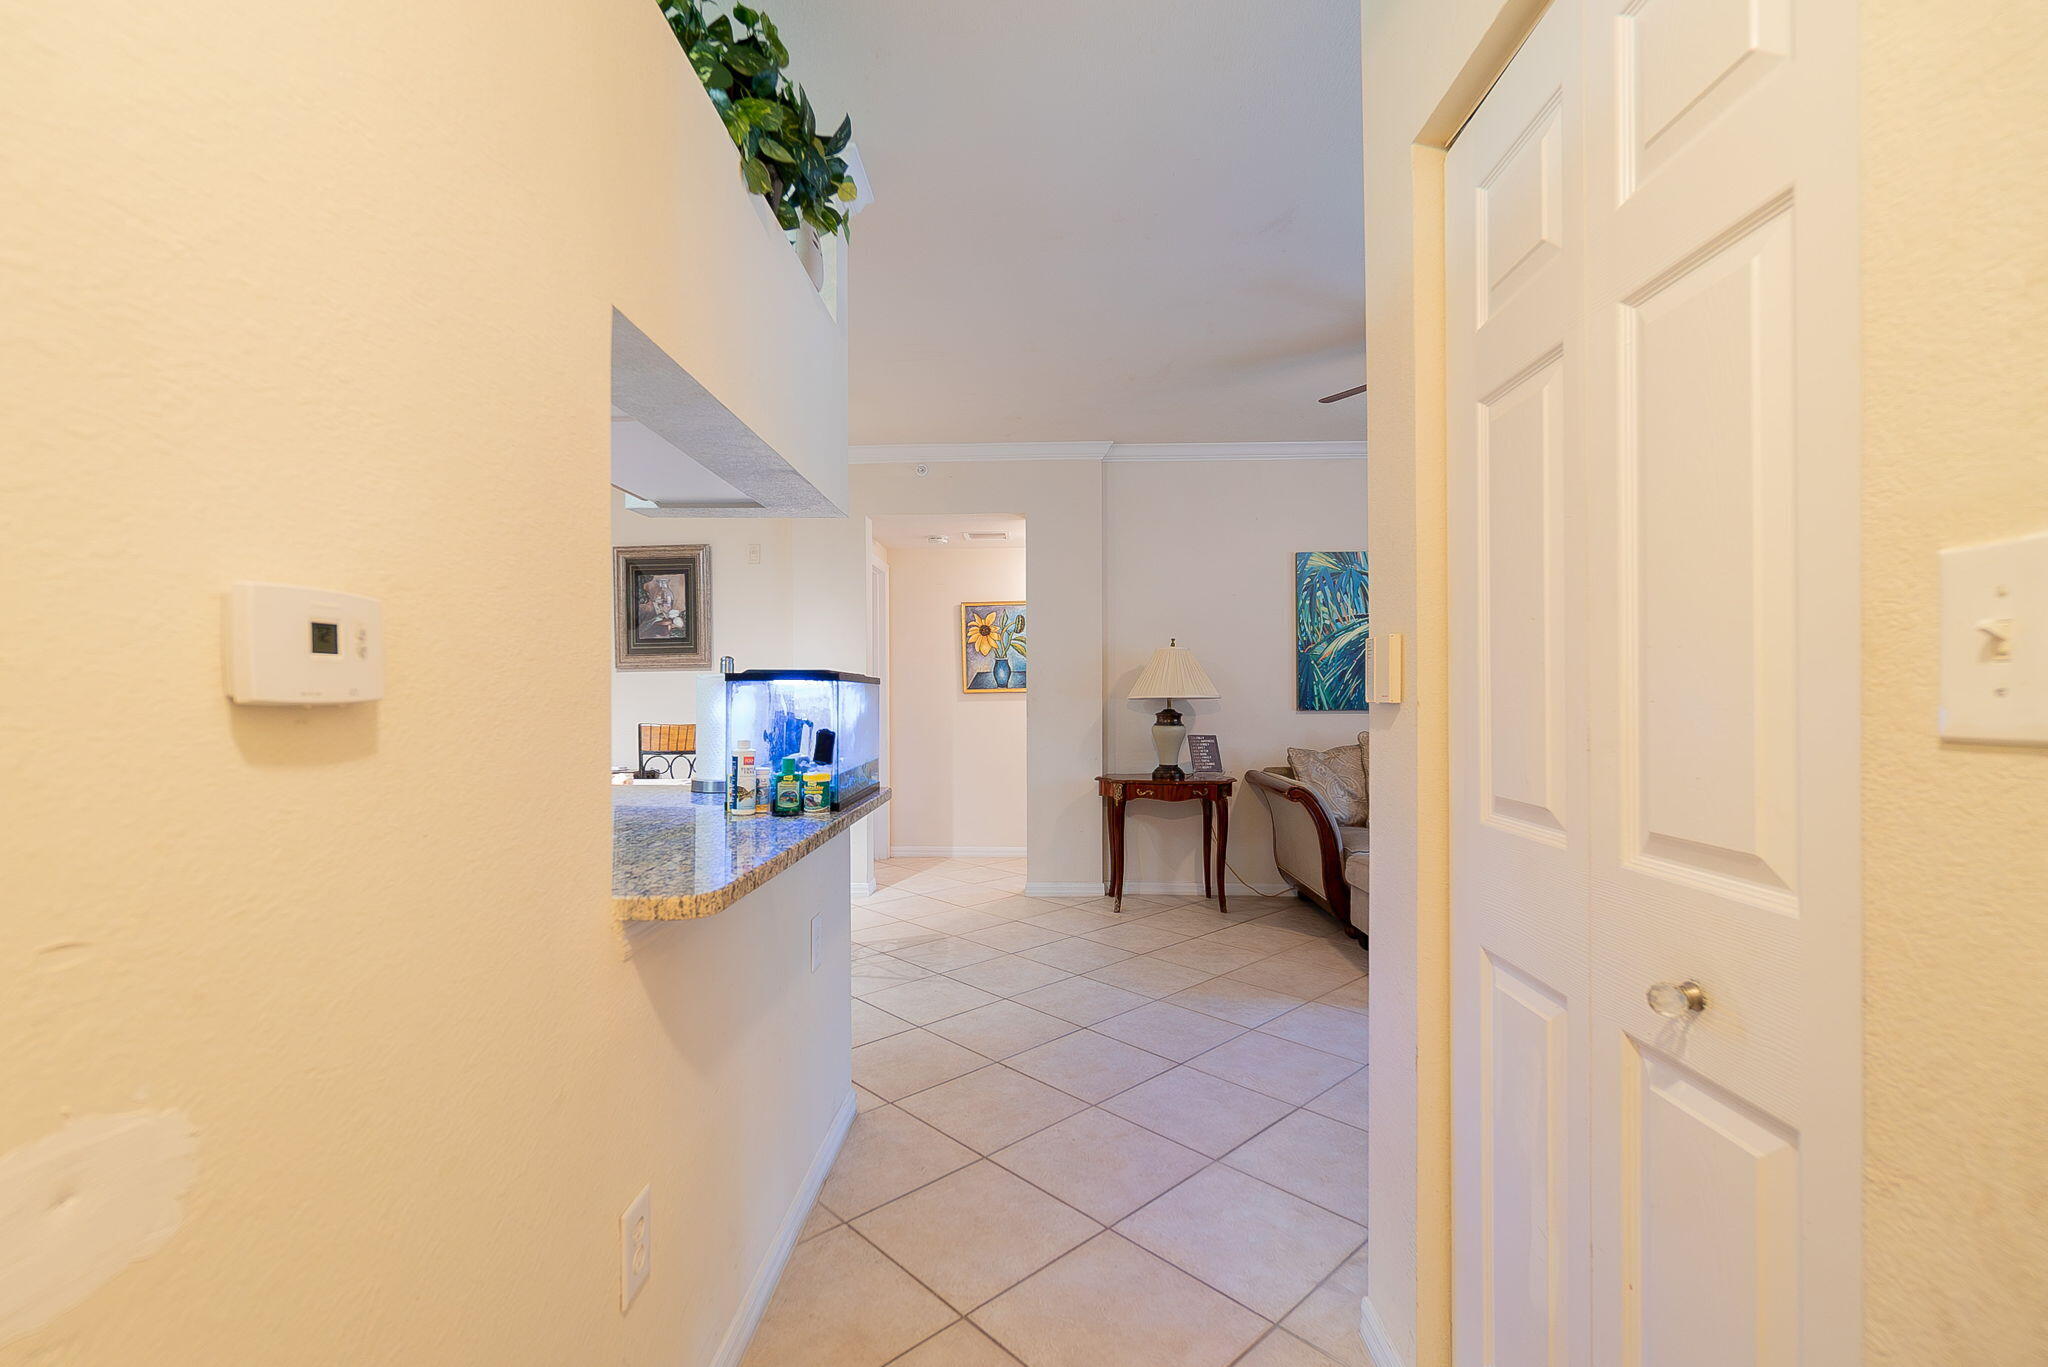 Property for Sale at 6394 Emerald Dunes Drive 204, West Palm Beach, Palm Beach County, Florida - Bedrooms: 2 
Bathrooms: 2  - $305,000